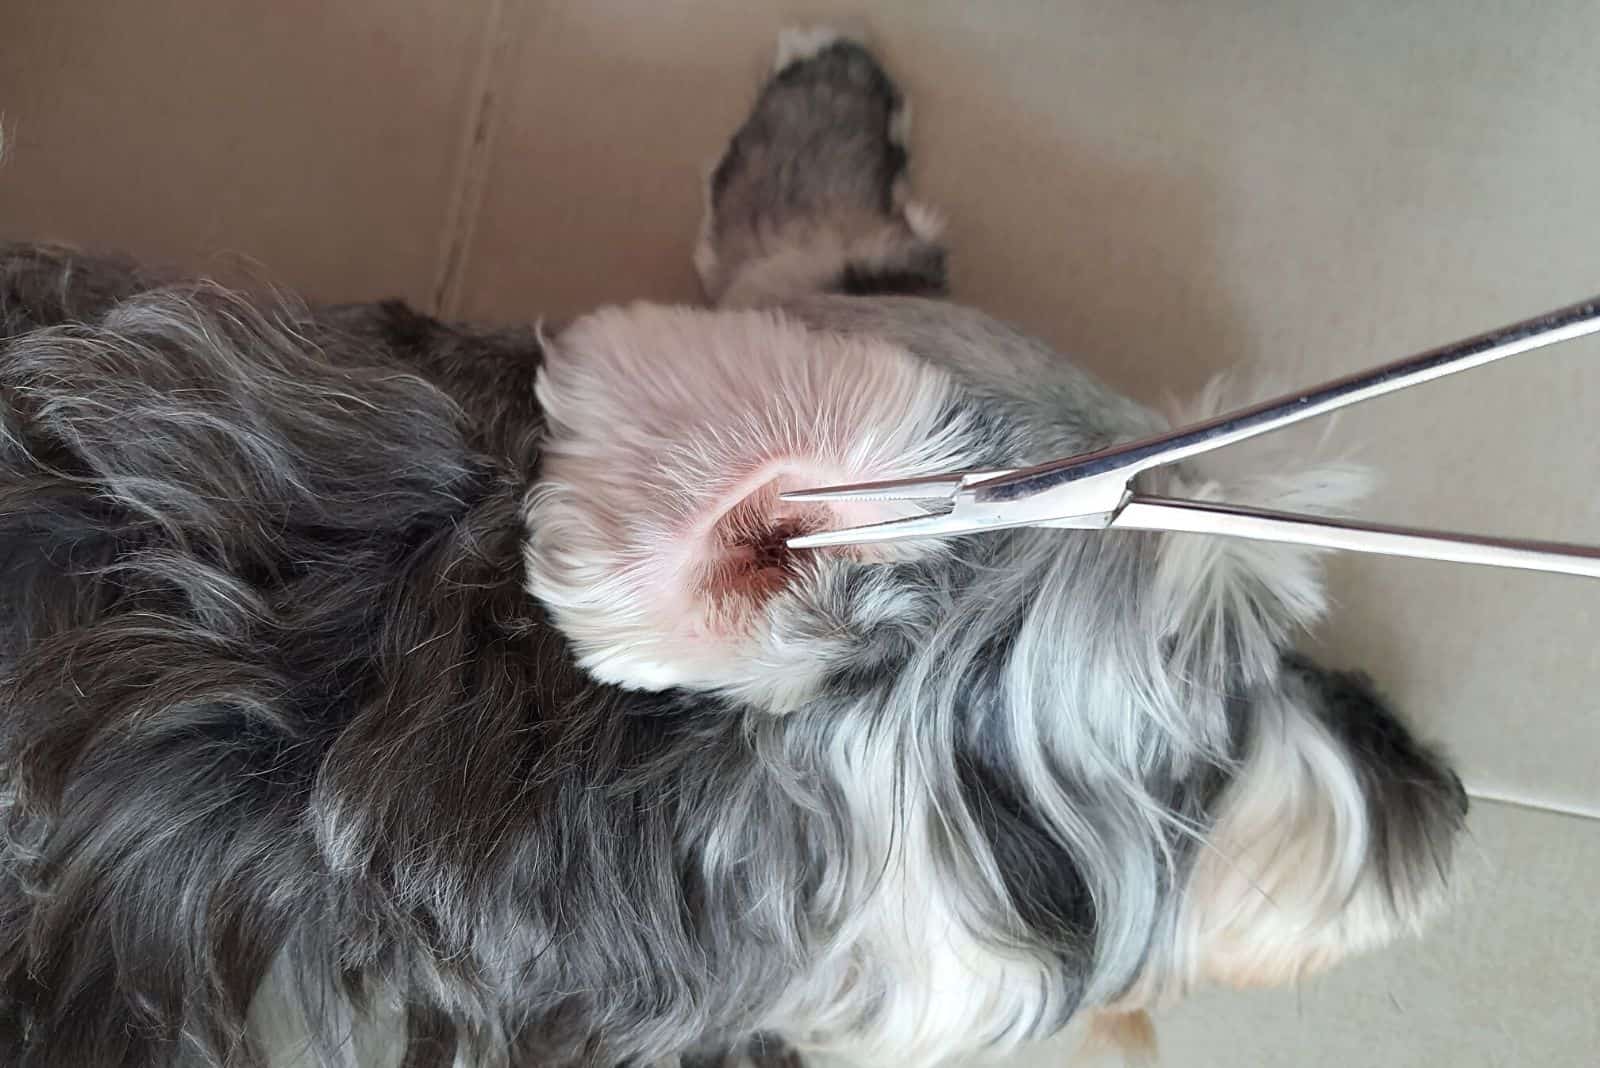 plucking hair from a dog’s ear